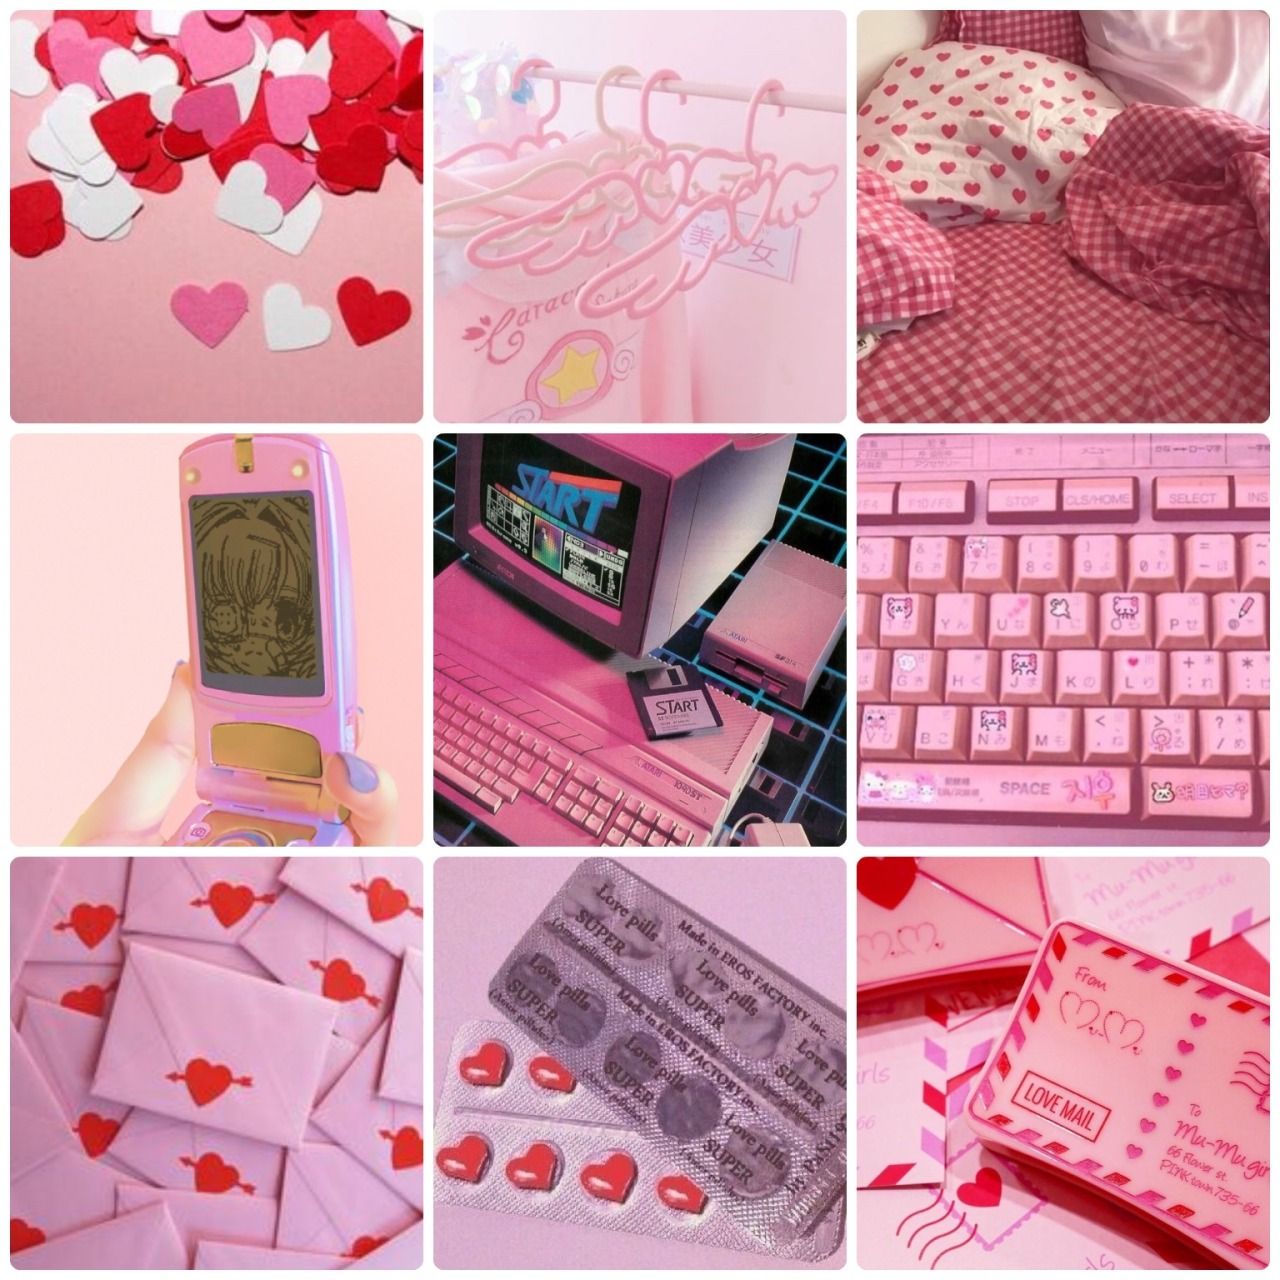 A collage of pink and red images including a phone, keyboard, bed, and love letters. - Lovecore